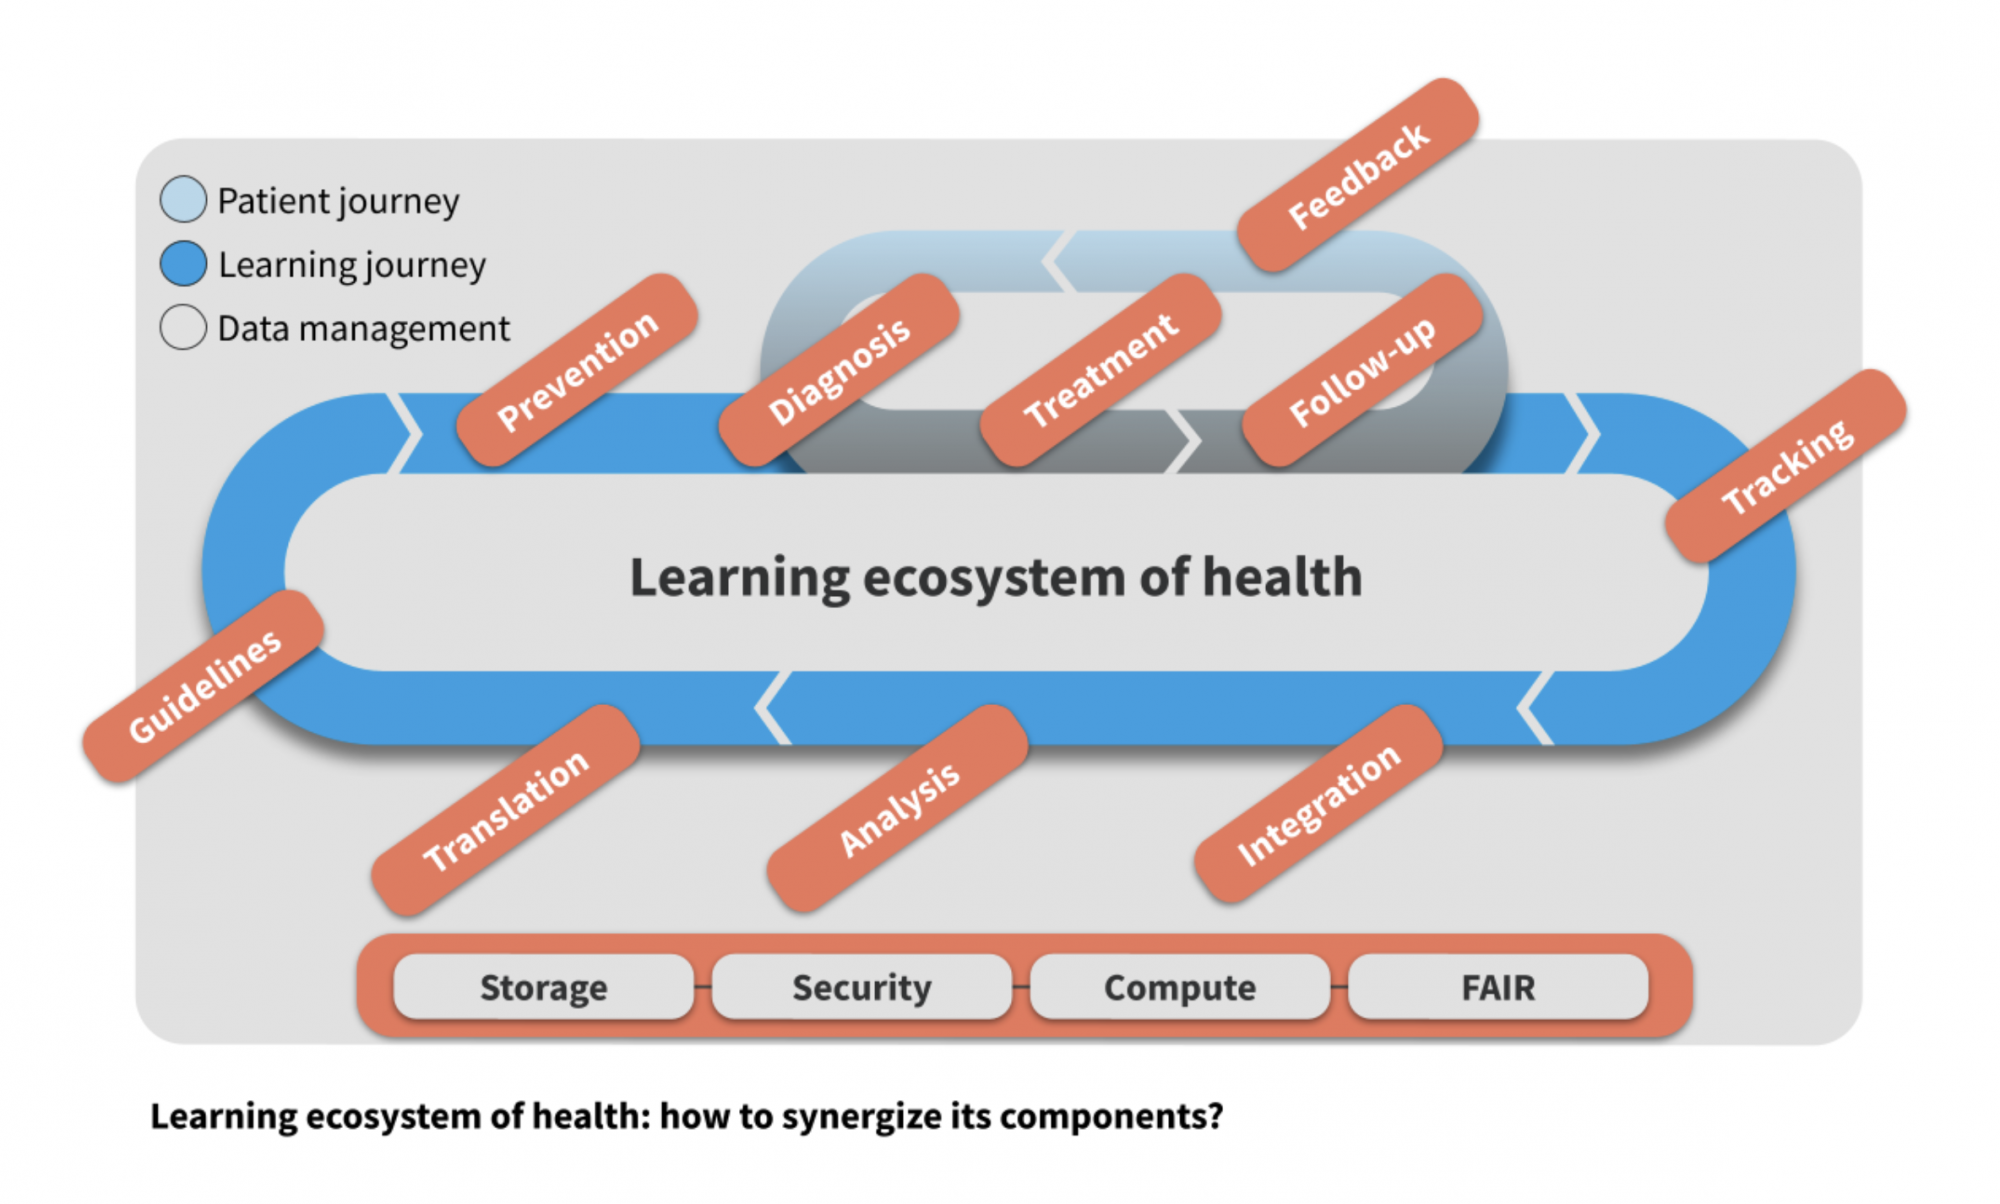 A diagram of the learning ecosystem of health showing how the patient journey (diagnosis, treatment, feedback, followup) is a small component of the overall learning journey ( prevention, diagnosis, treatment, followup, training, integration, analysis, translation, guidelines)